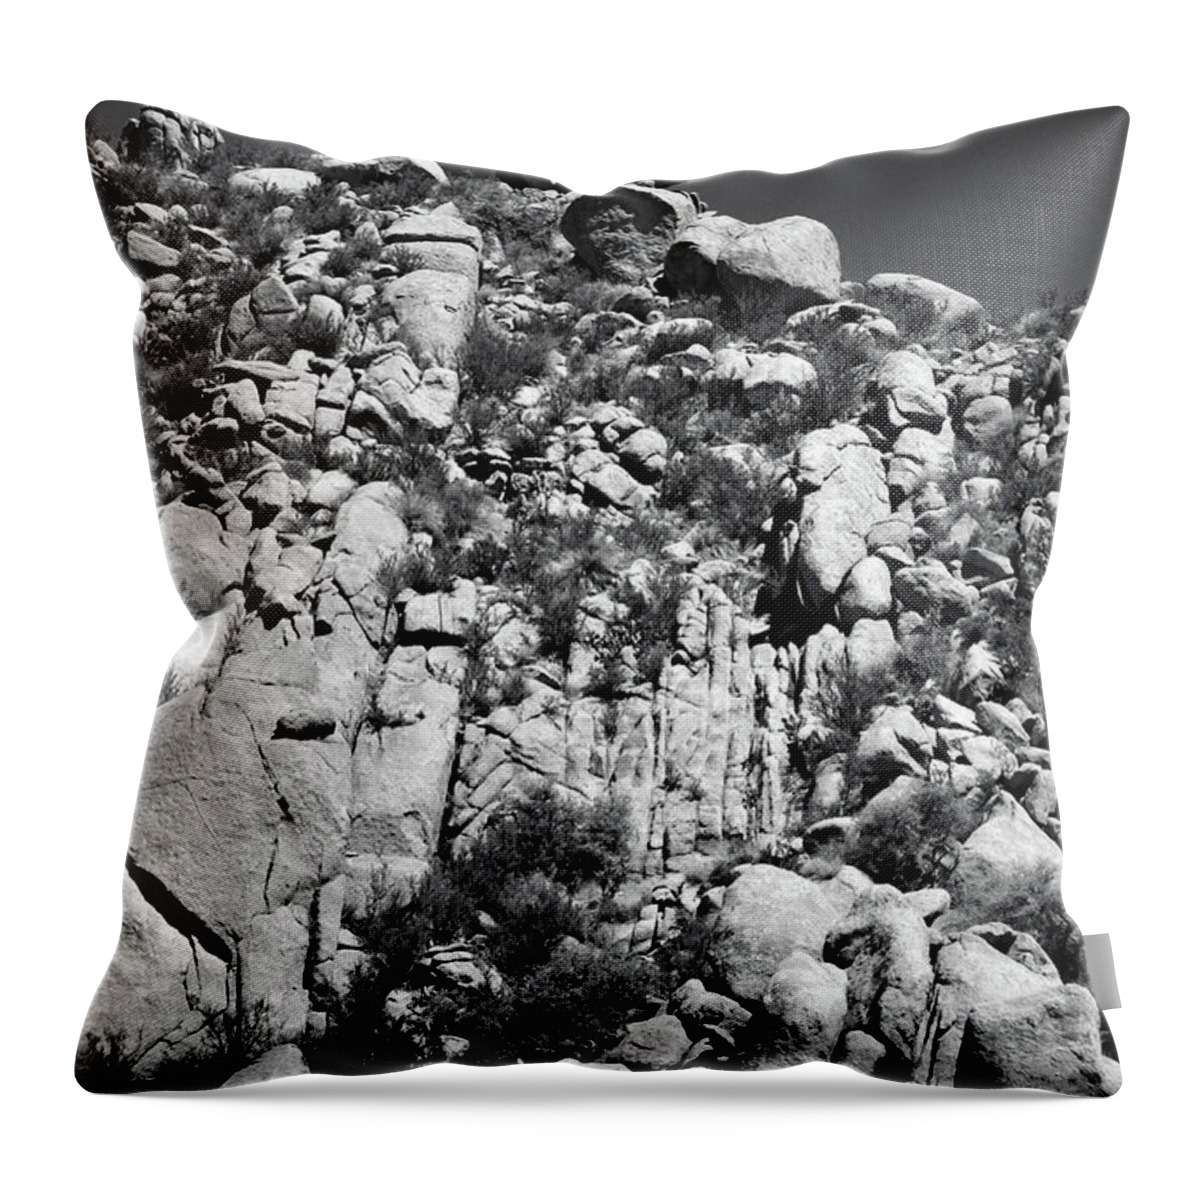 Landscape Throw Pillow featuring the photograph Rock Face Sandia Mountain by Ron Cline